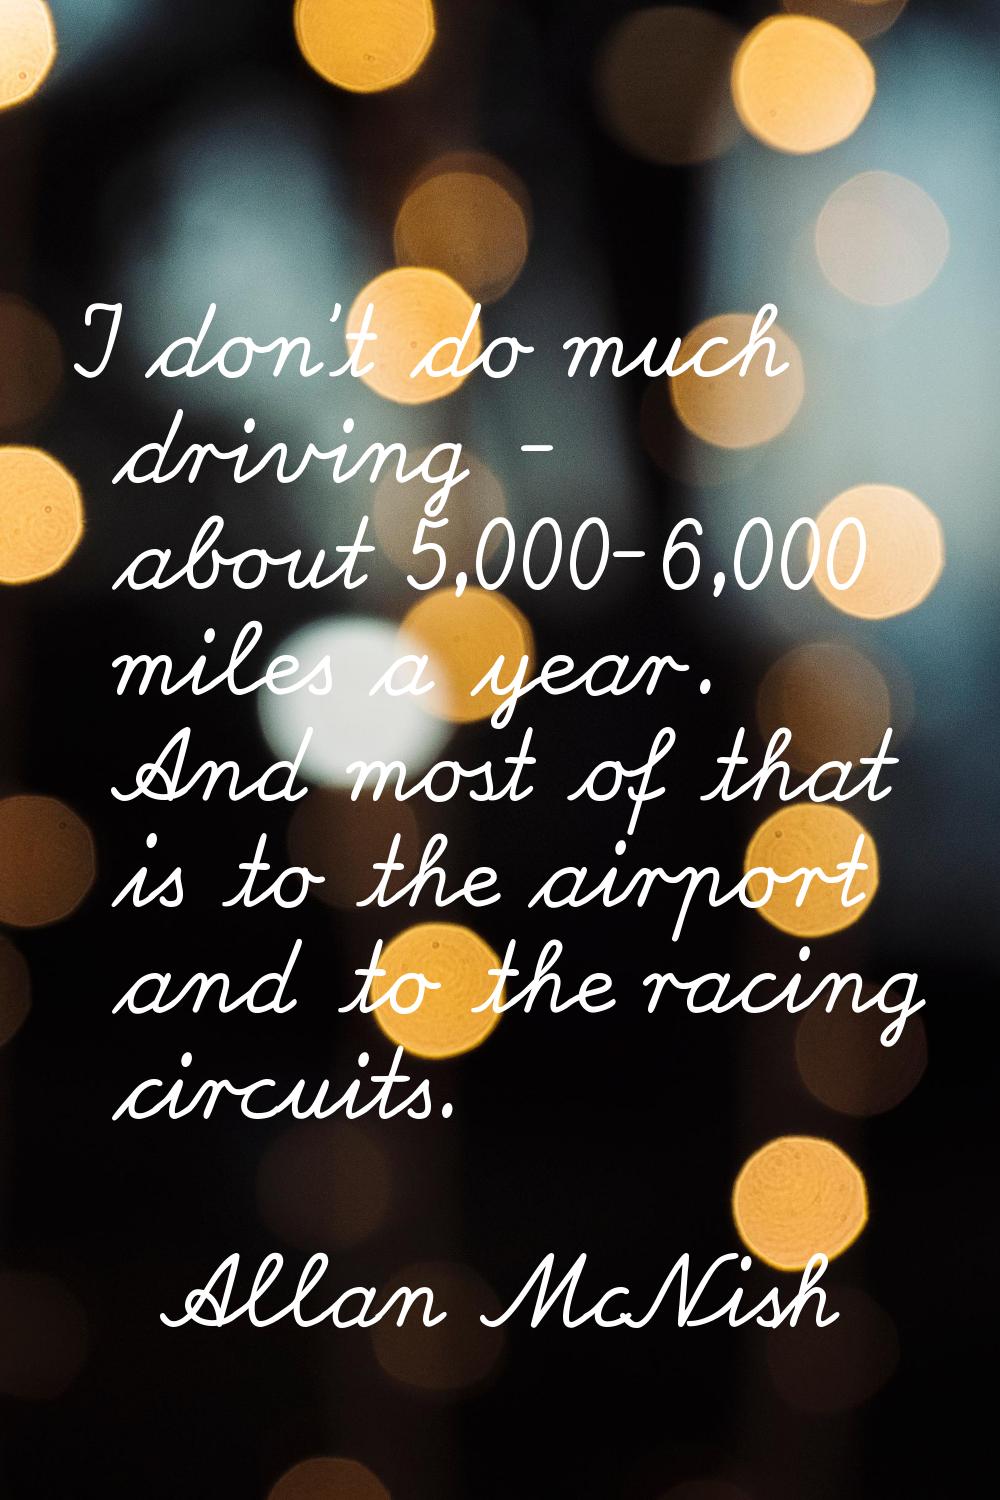 I don't do much driving - about 5,000-6,000 miles a year. And most of that is to the airport and to